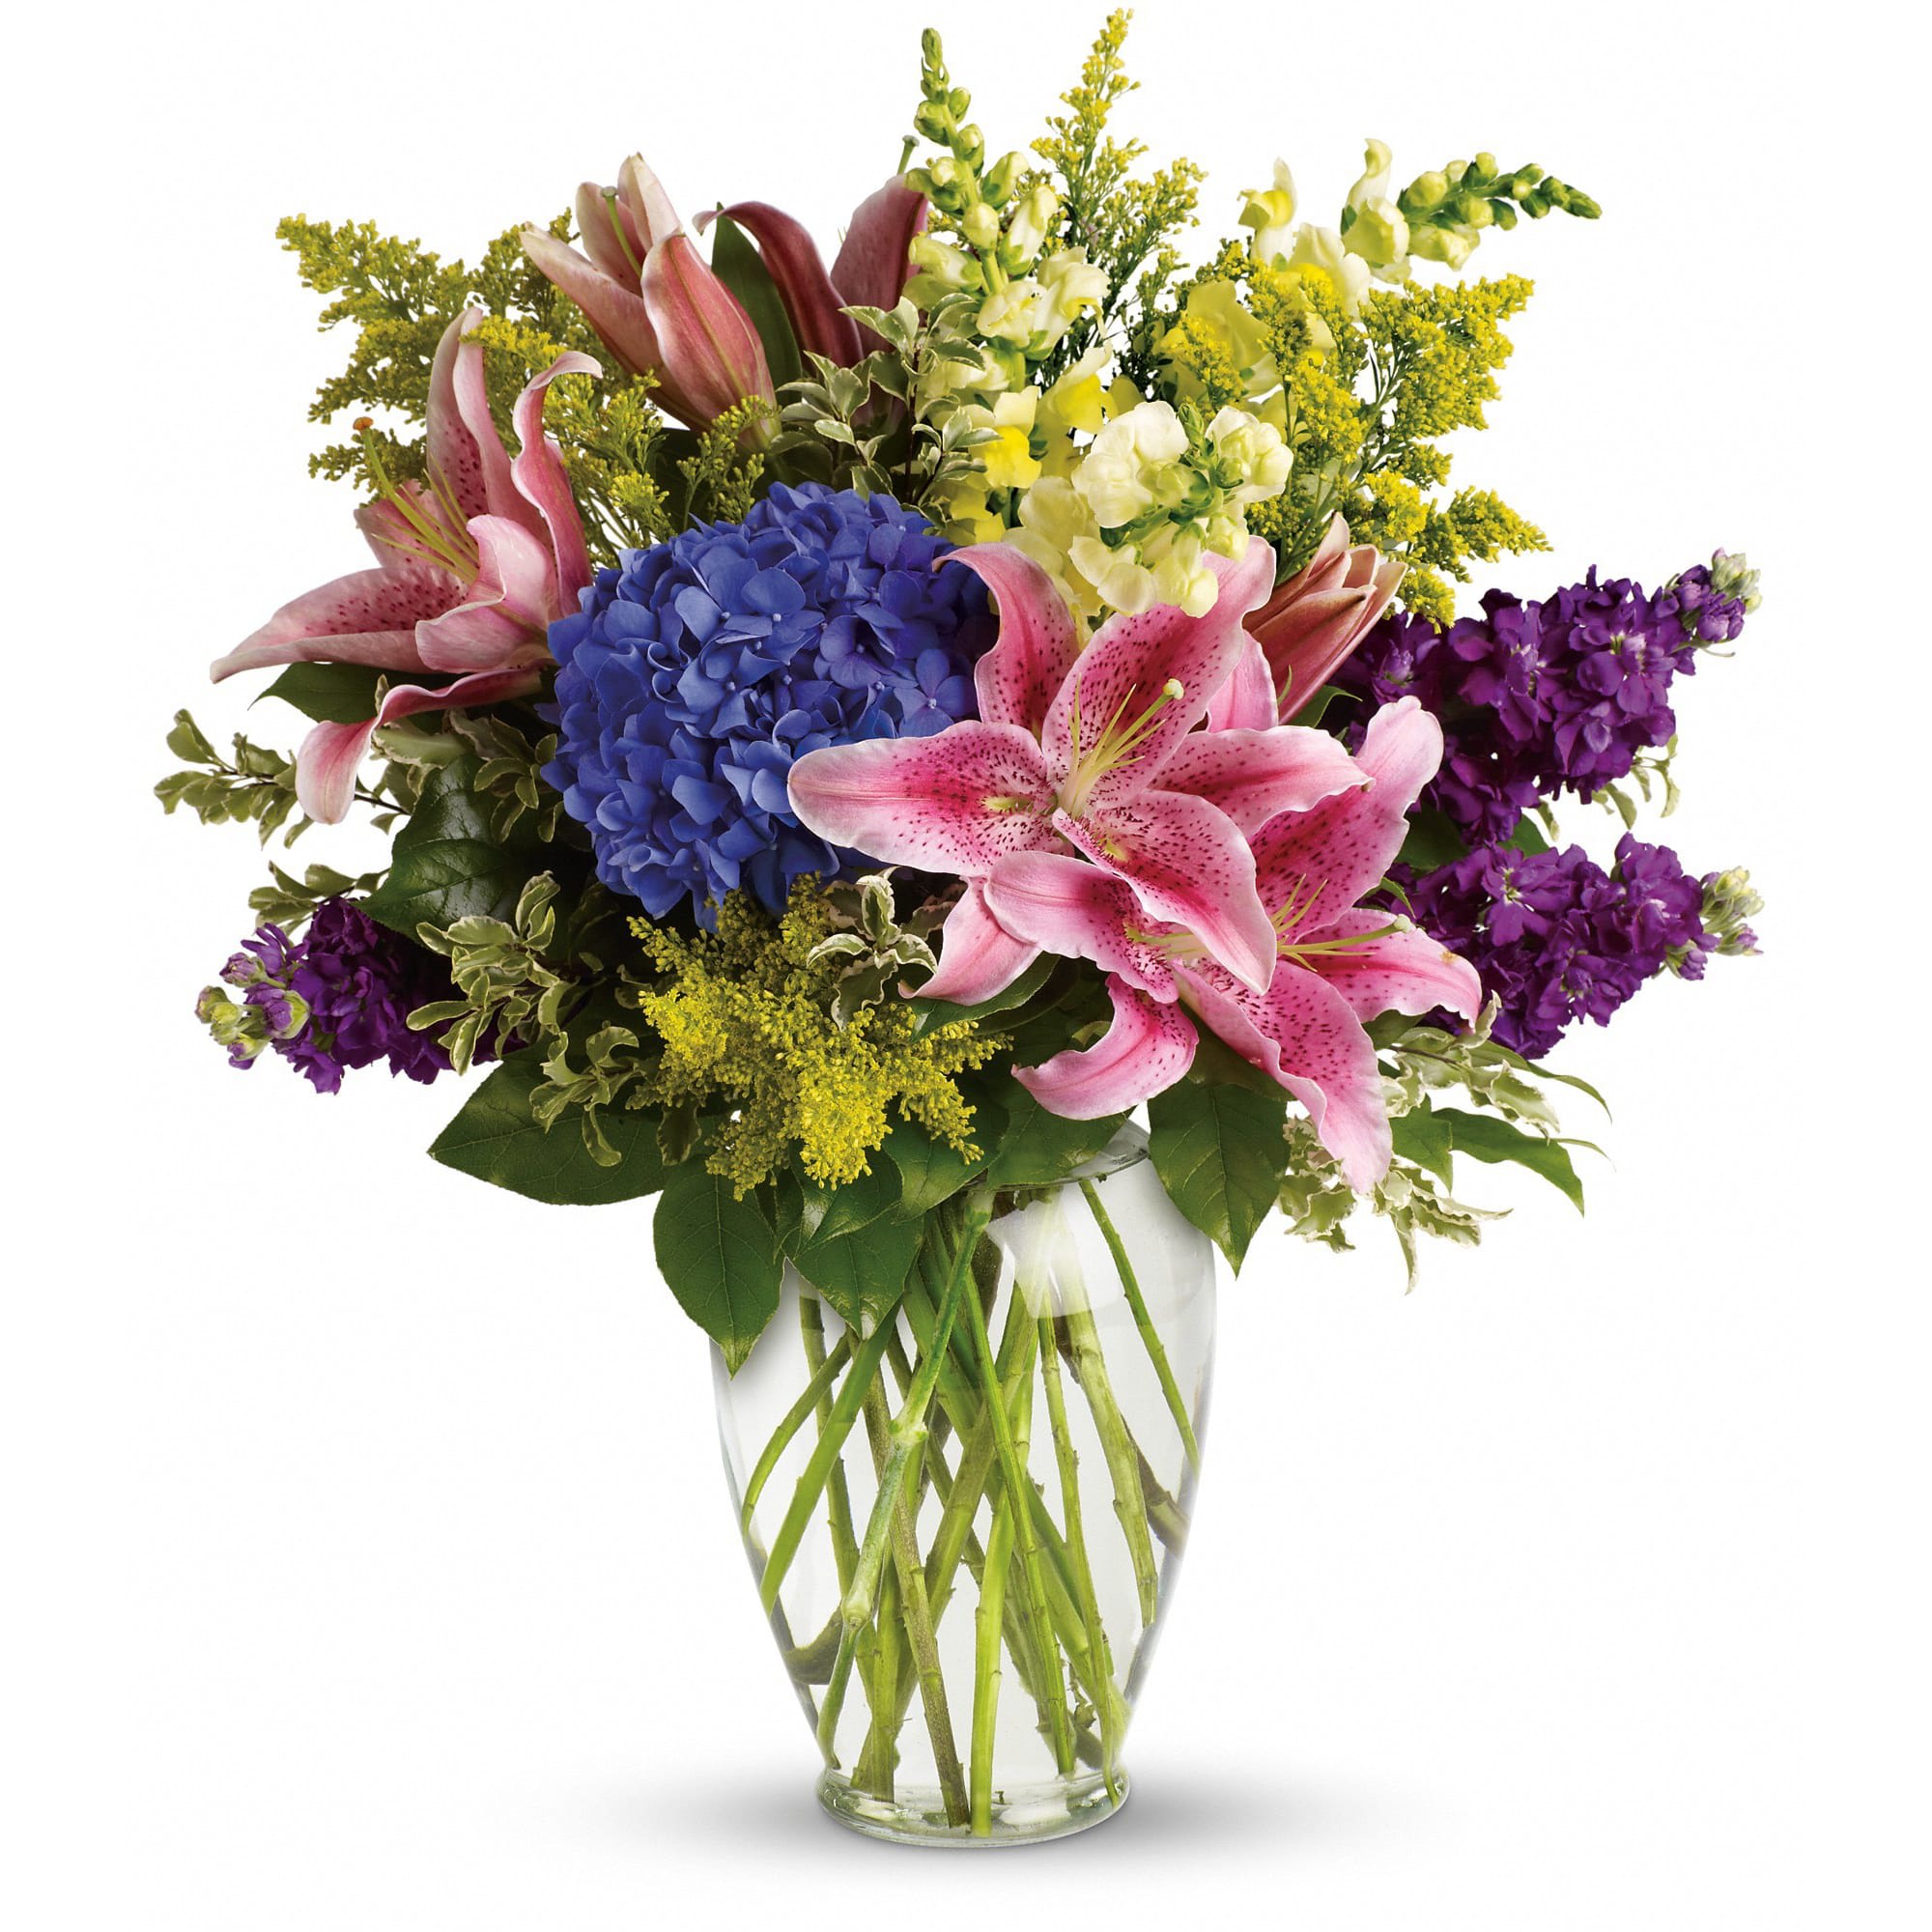 Love Everlasting Bouquet by Teleflora - Let the family at home know you are thinking of them with this lovely bouquet of pink lilies, blue hydrangea and other floral favorites. It will mean a lot.  